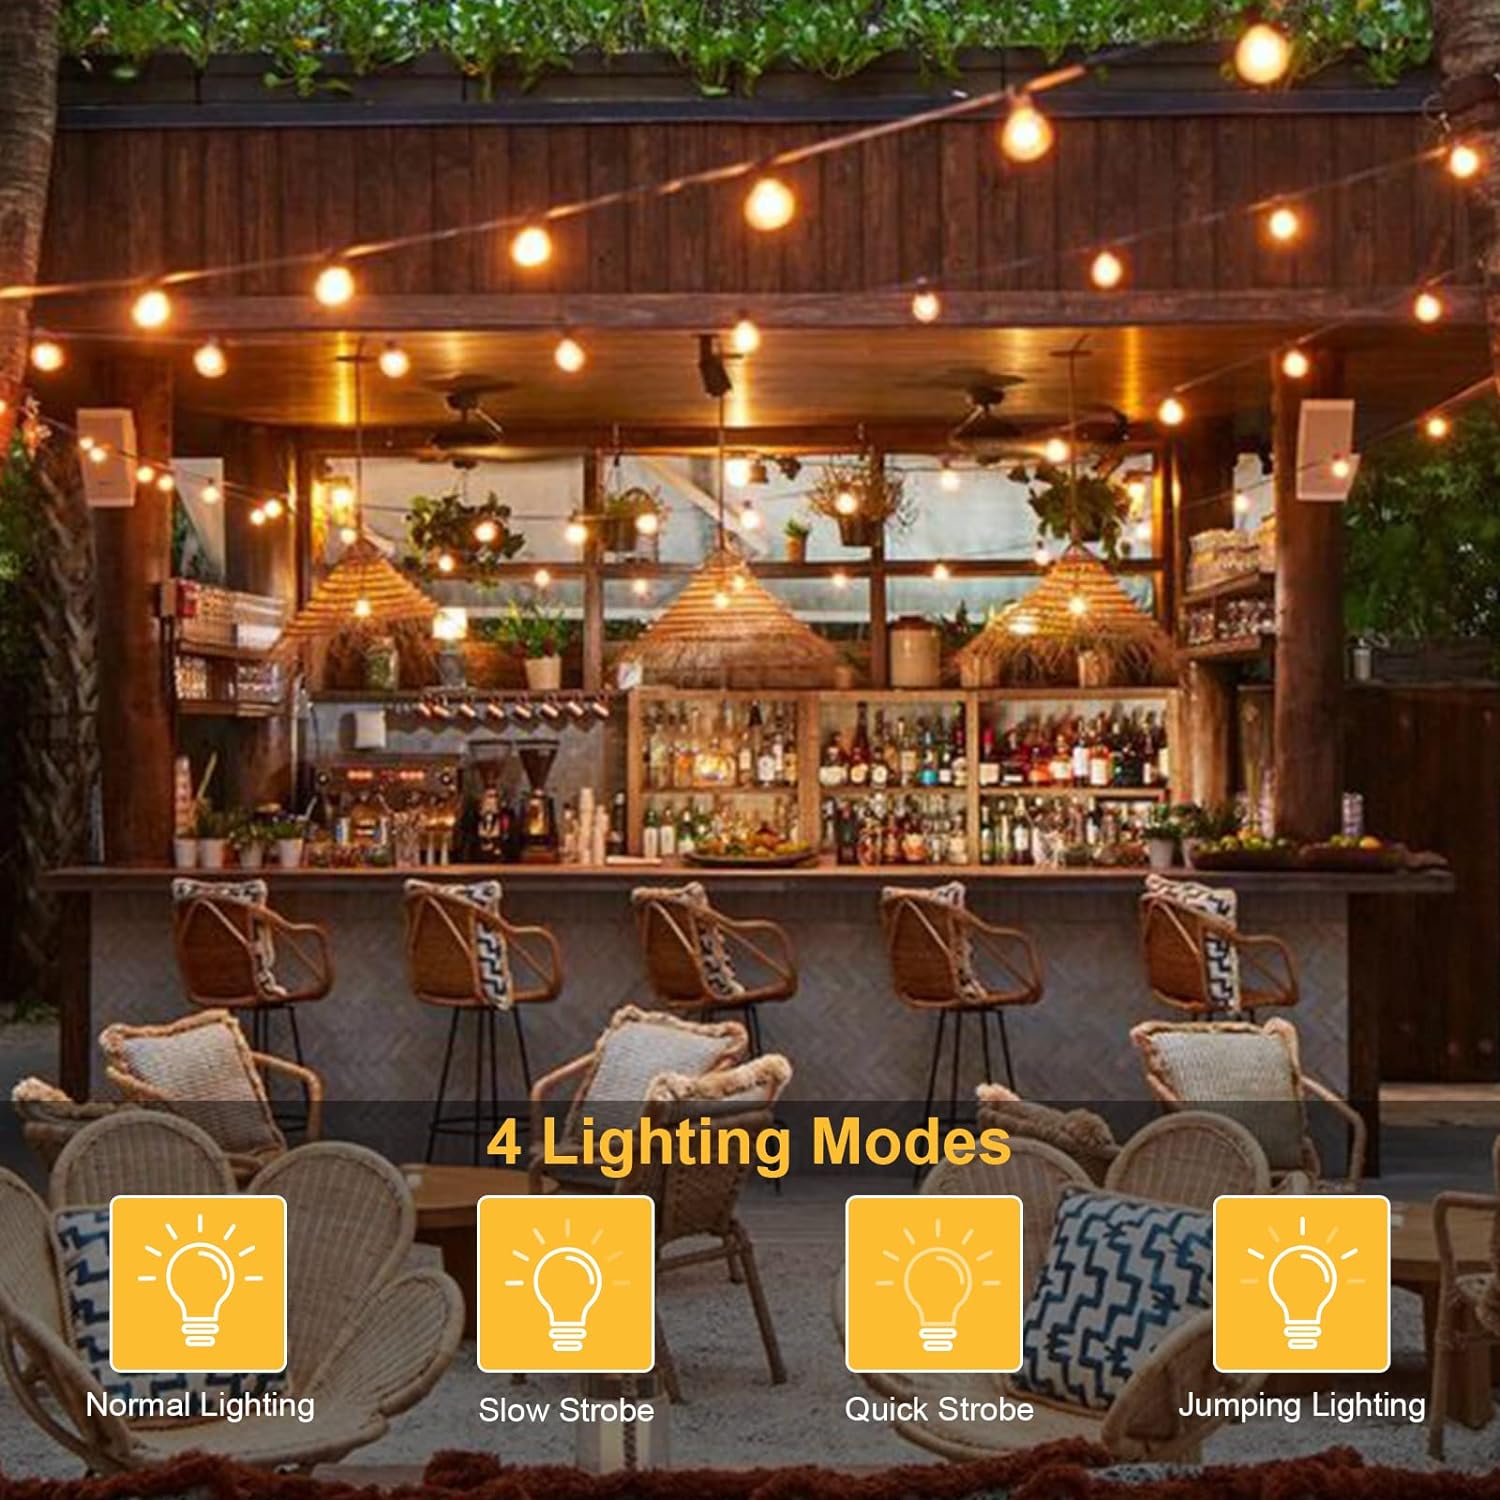 LED-Light-Strip-Outdoor-Solar-String-Lights-12-Bulbs-IP65-Waterproof-Outside-5M-Solar-Powered-Patio-String-Lights-with-4-Lighting-Modes-for-Backyard-Bistro-Party-Cafe-26